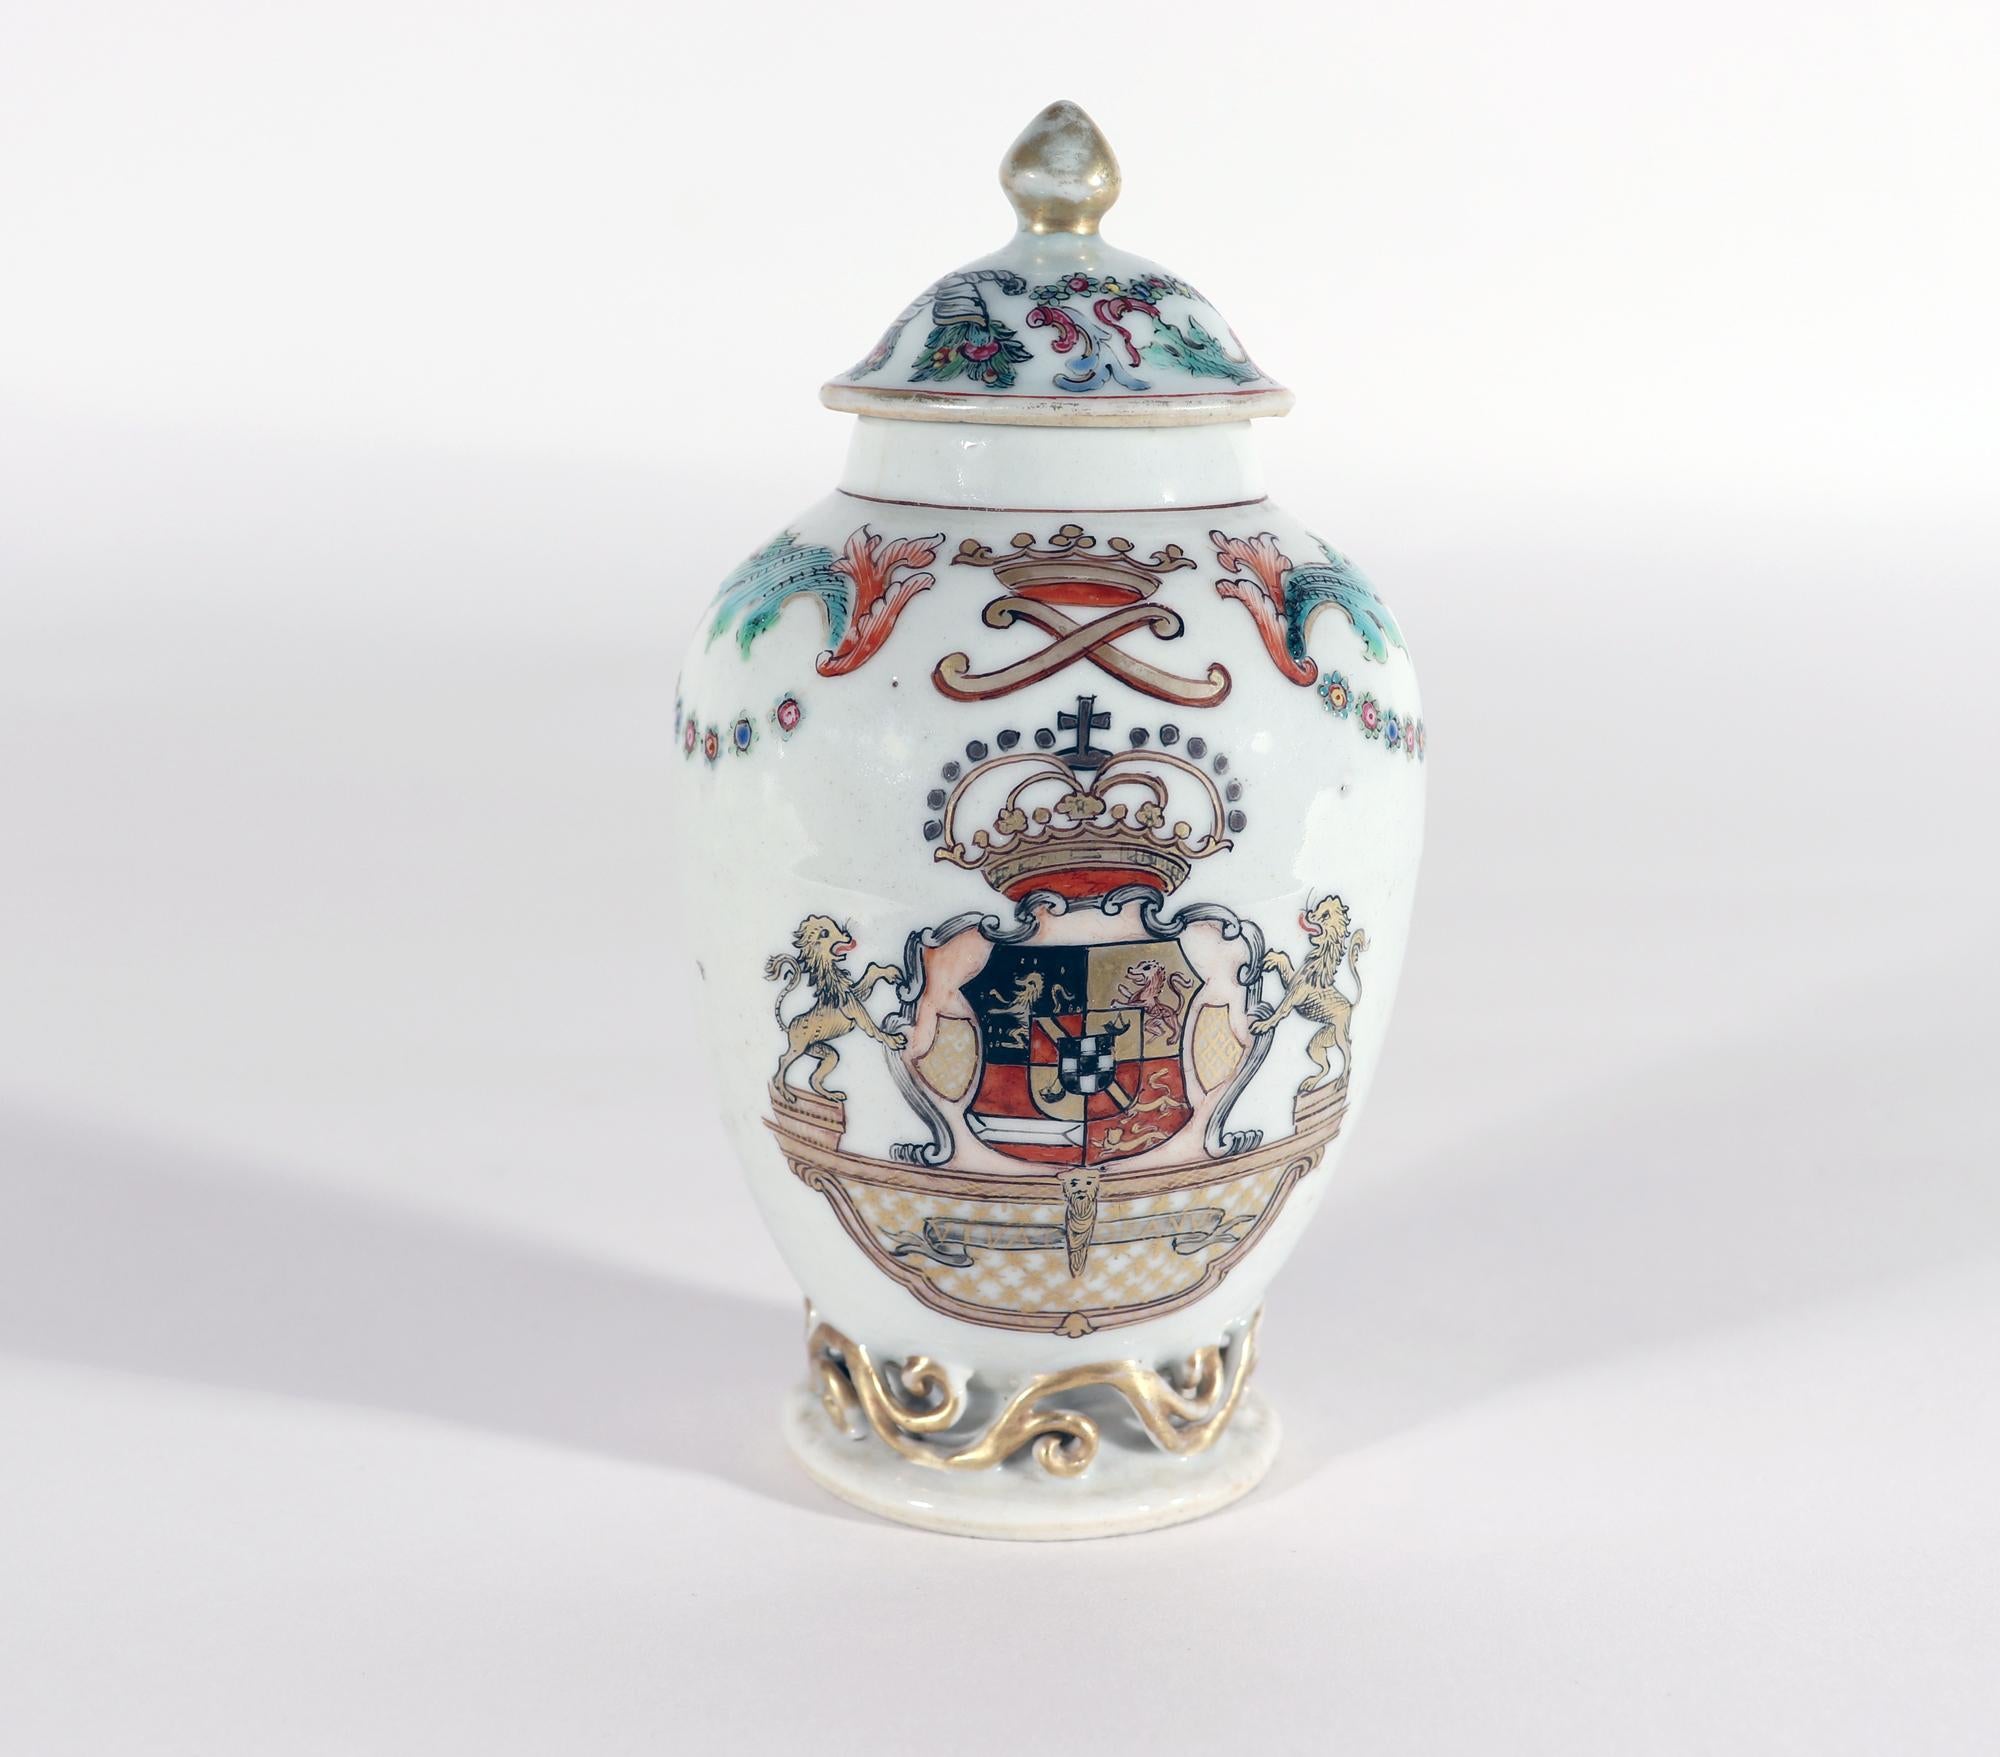 Chinese export Armorial Porcelain teapoy or tea caddy,
Royal Coat of Arms, 
Arms of Prince Willem IV of Orange (1711-51), Prince of Nassau-Dietz and Orange
Circa 1748

The Chinese Export armorial tea caddy is painted in iron-red, gilt and green